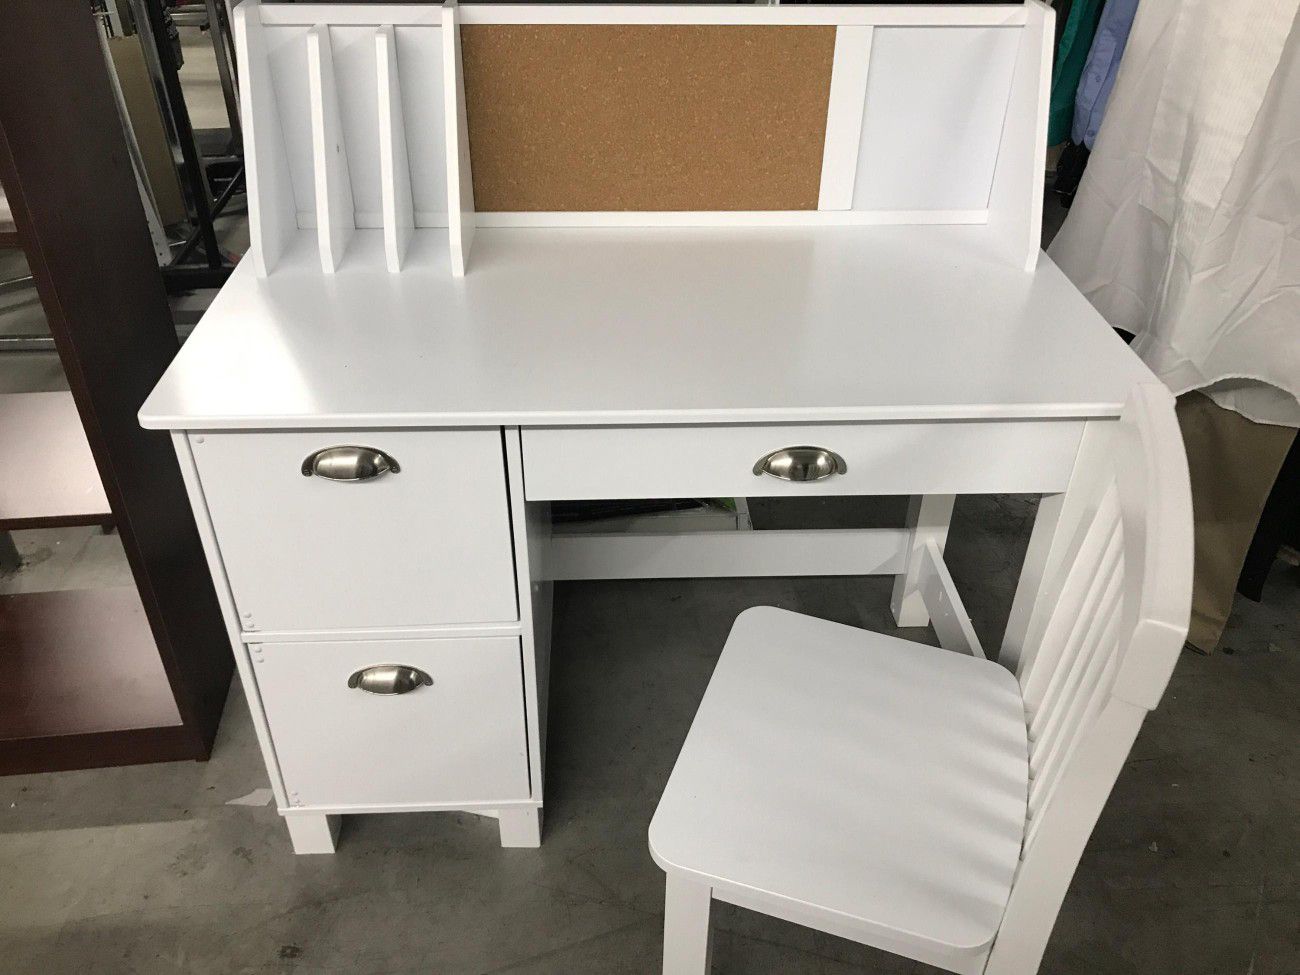 Kids craft toddler desk with chair white outboard bulletin boards drawers this is very nice $124.99 others retail this for $150